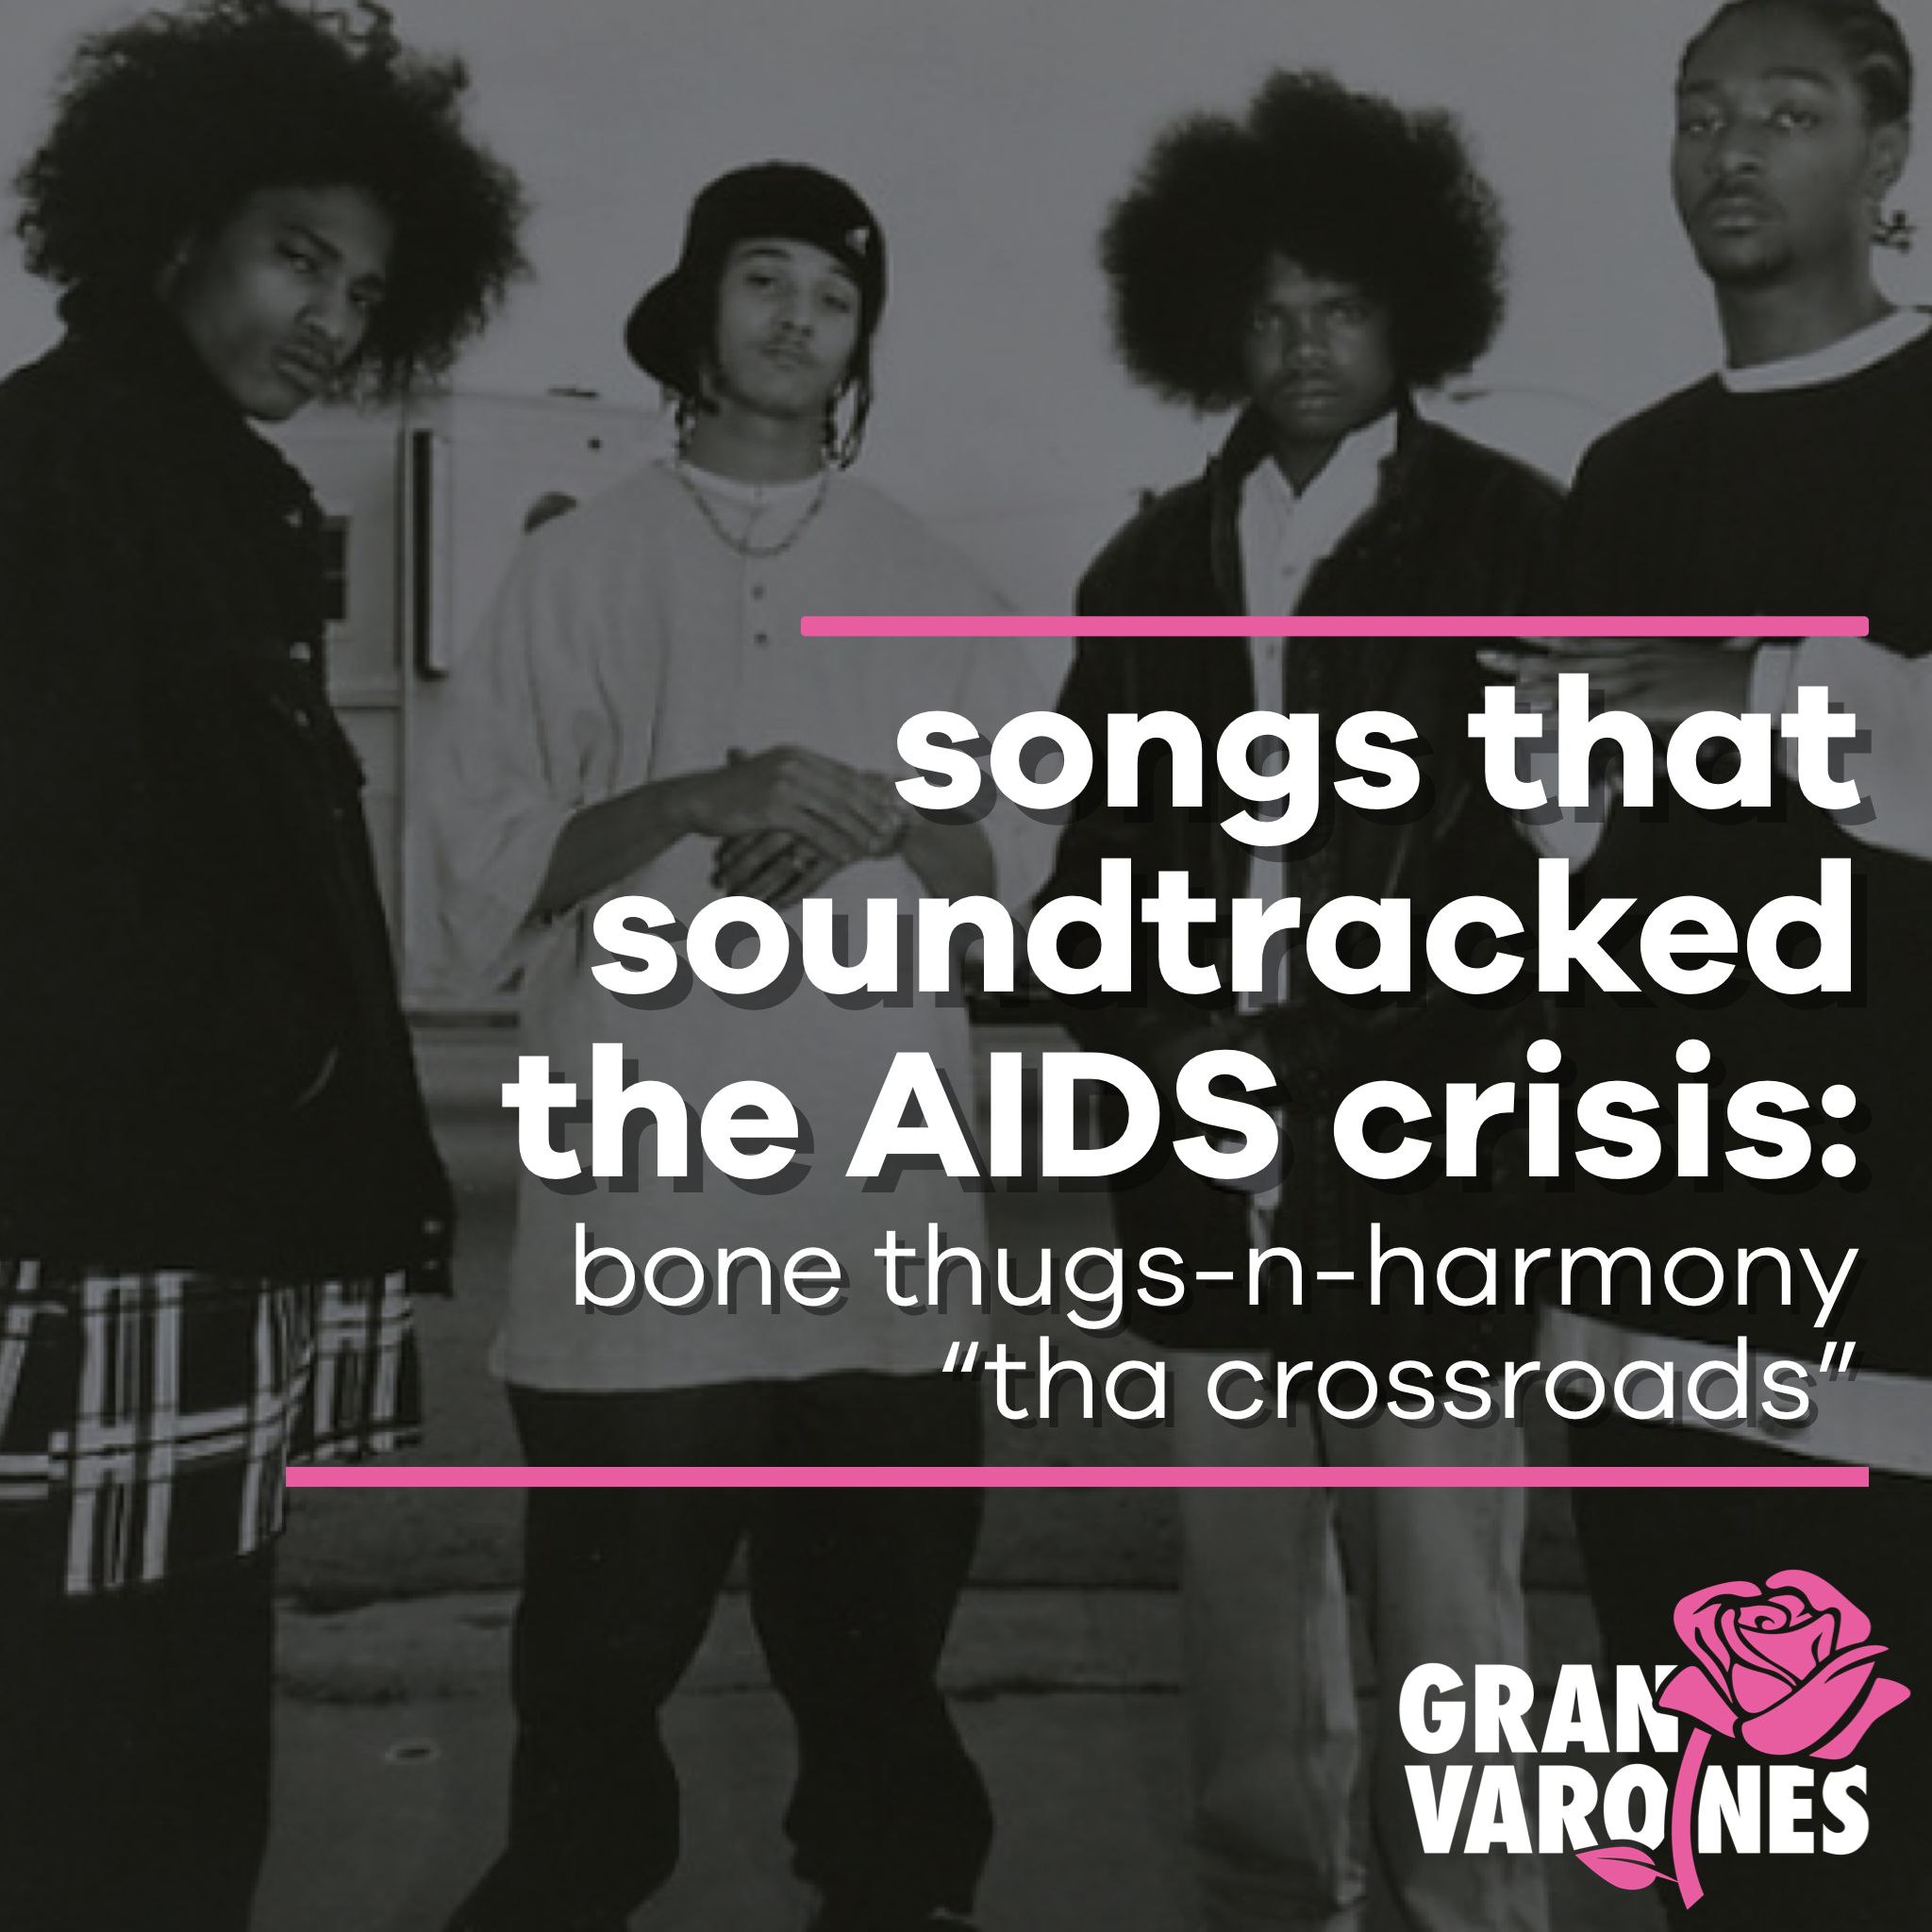 songs that soundtracked the AIDS crisis: bone thugs-n-harmony’s “tha crossroads”